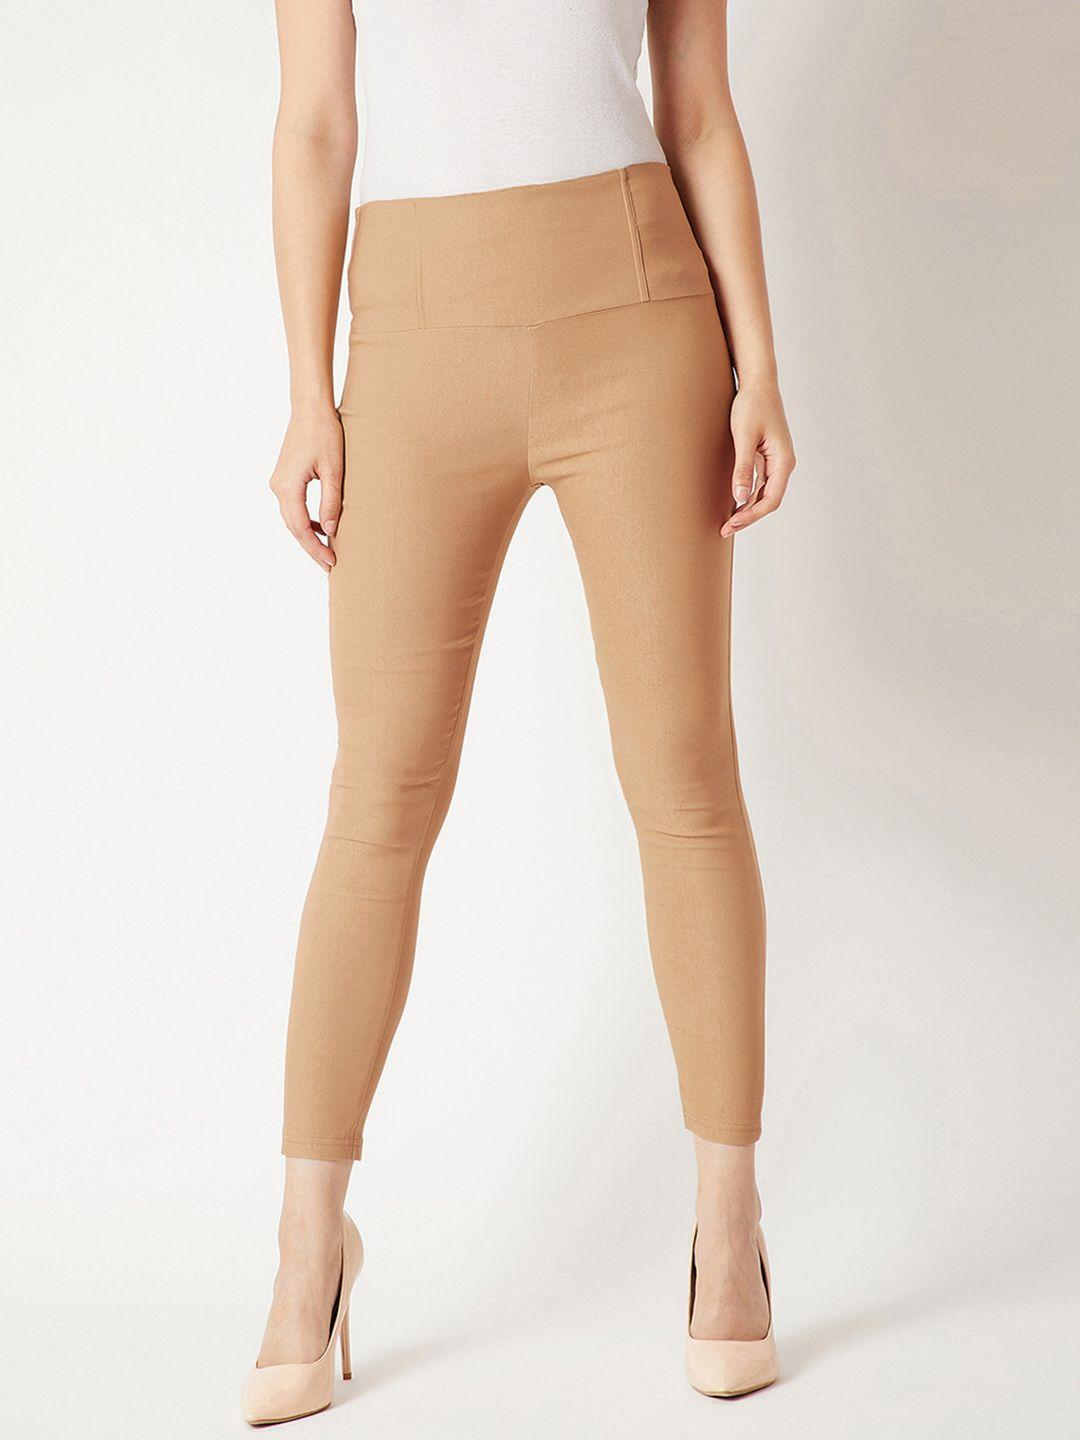 miss-chase-women-beige-solid-jeggings